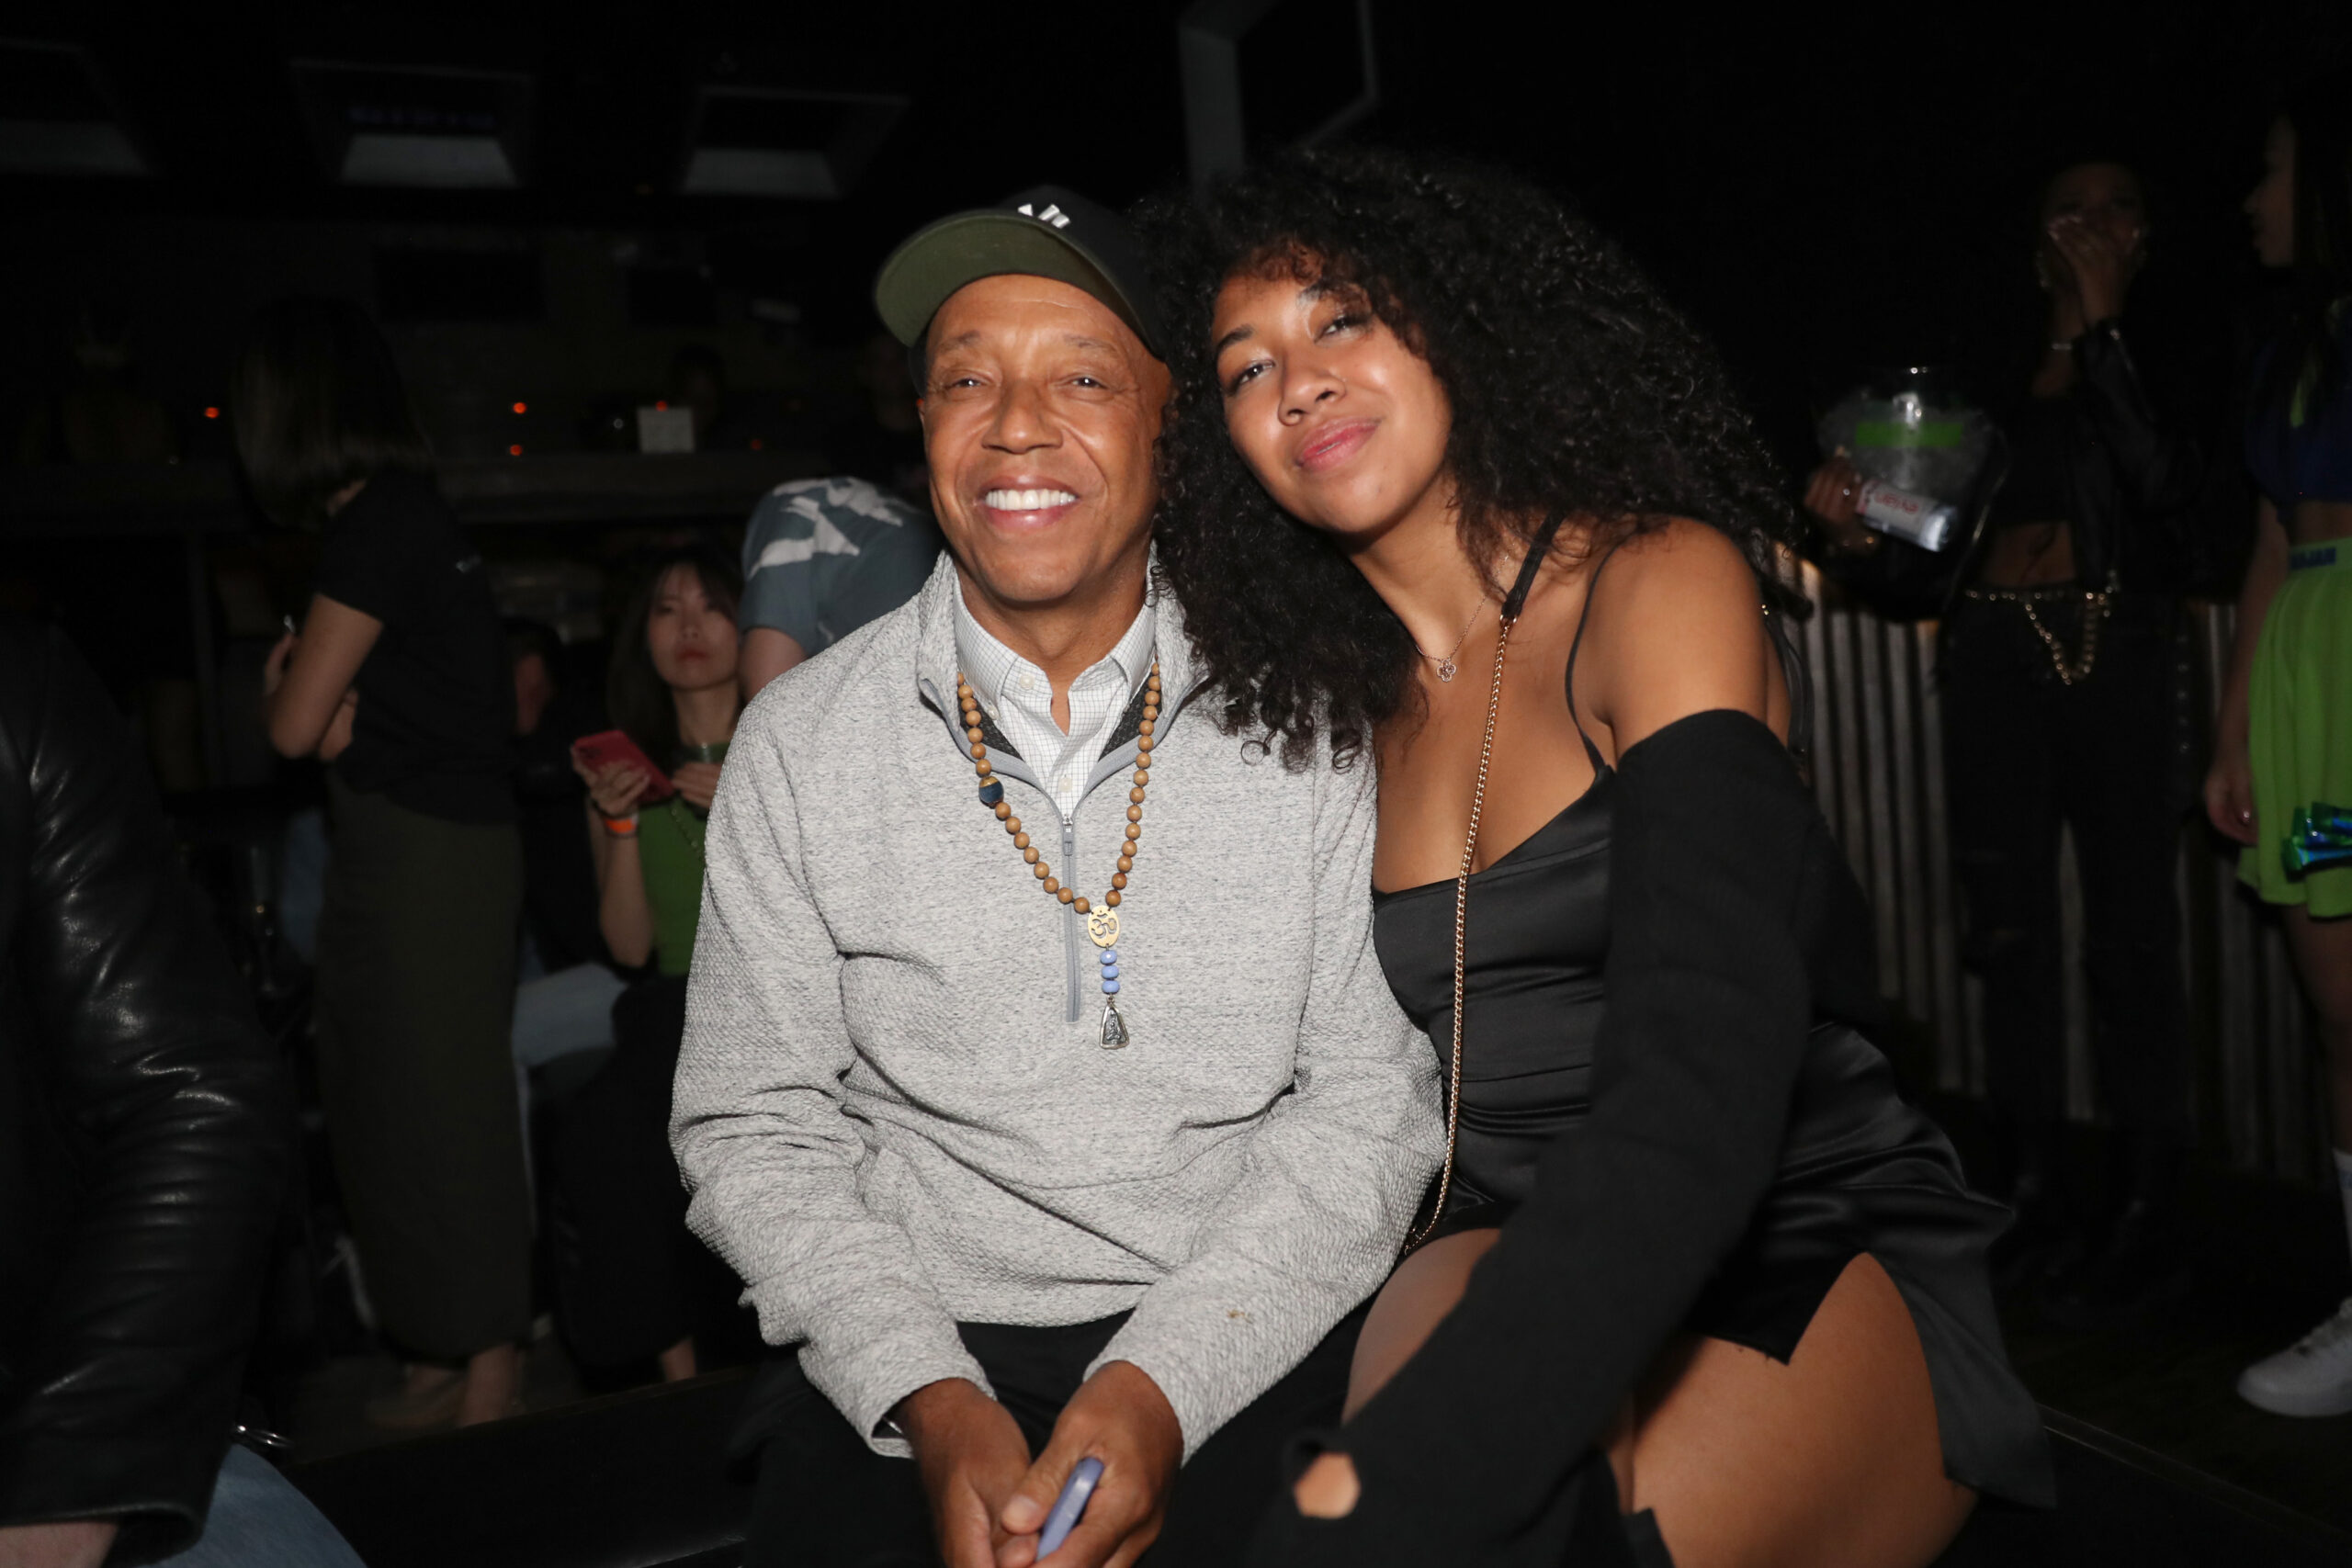 Russell Simmons and Kimora Lee Simmons' Daughter Aoki Lee Simmons Hits Back at a Fan's Puzzlement About Her Pursuing Modeling While Studying at Harvard